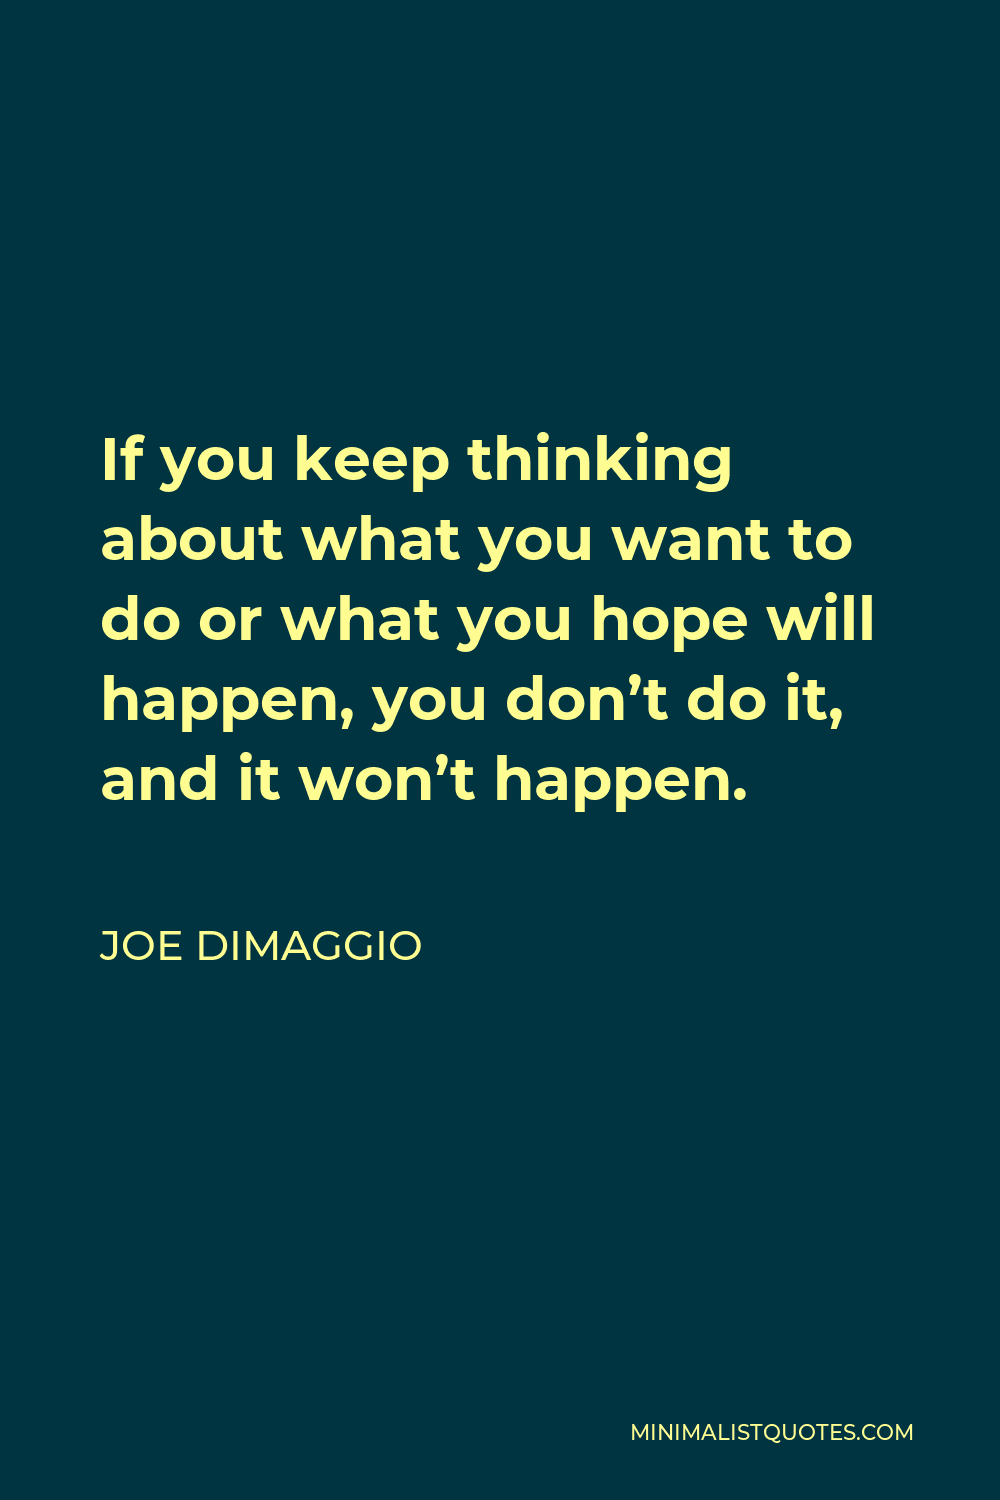 Joe DiMaggio Quote - If you keep thinking about what you want to do or what you hope will happen, you don’t do it, and it won’t happen.